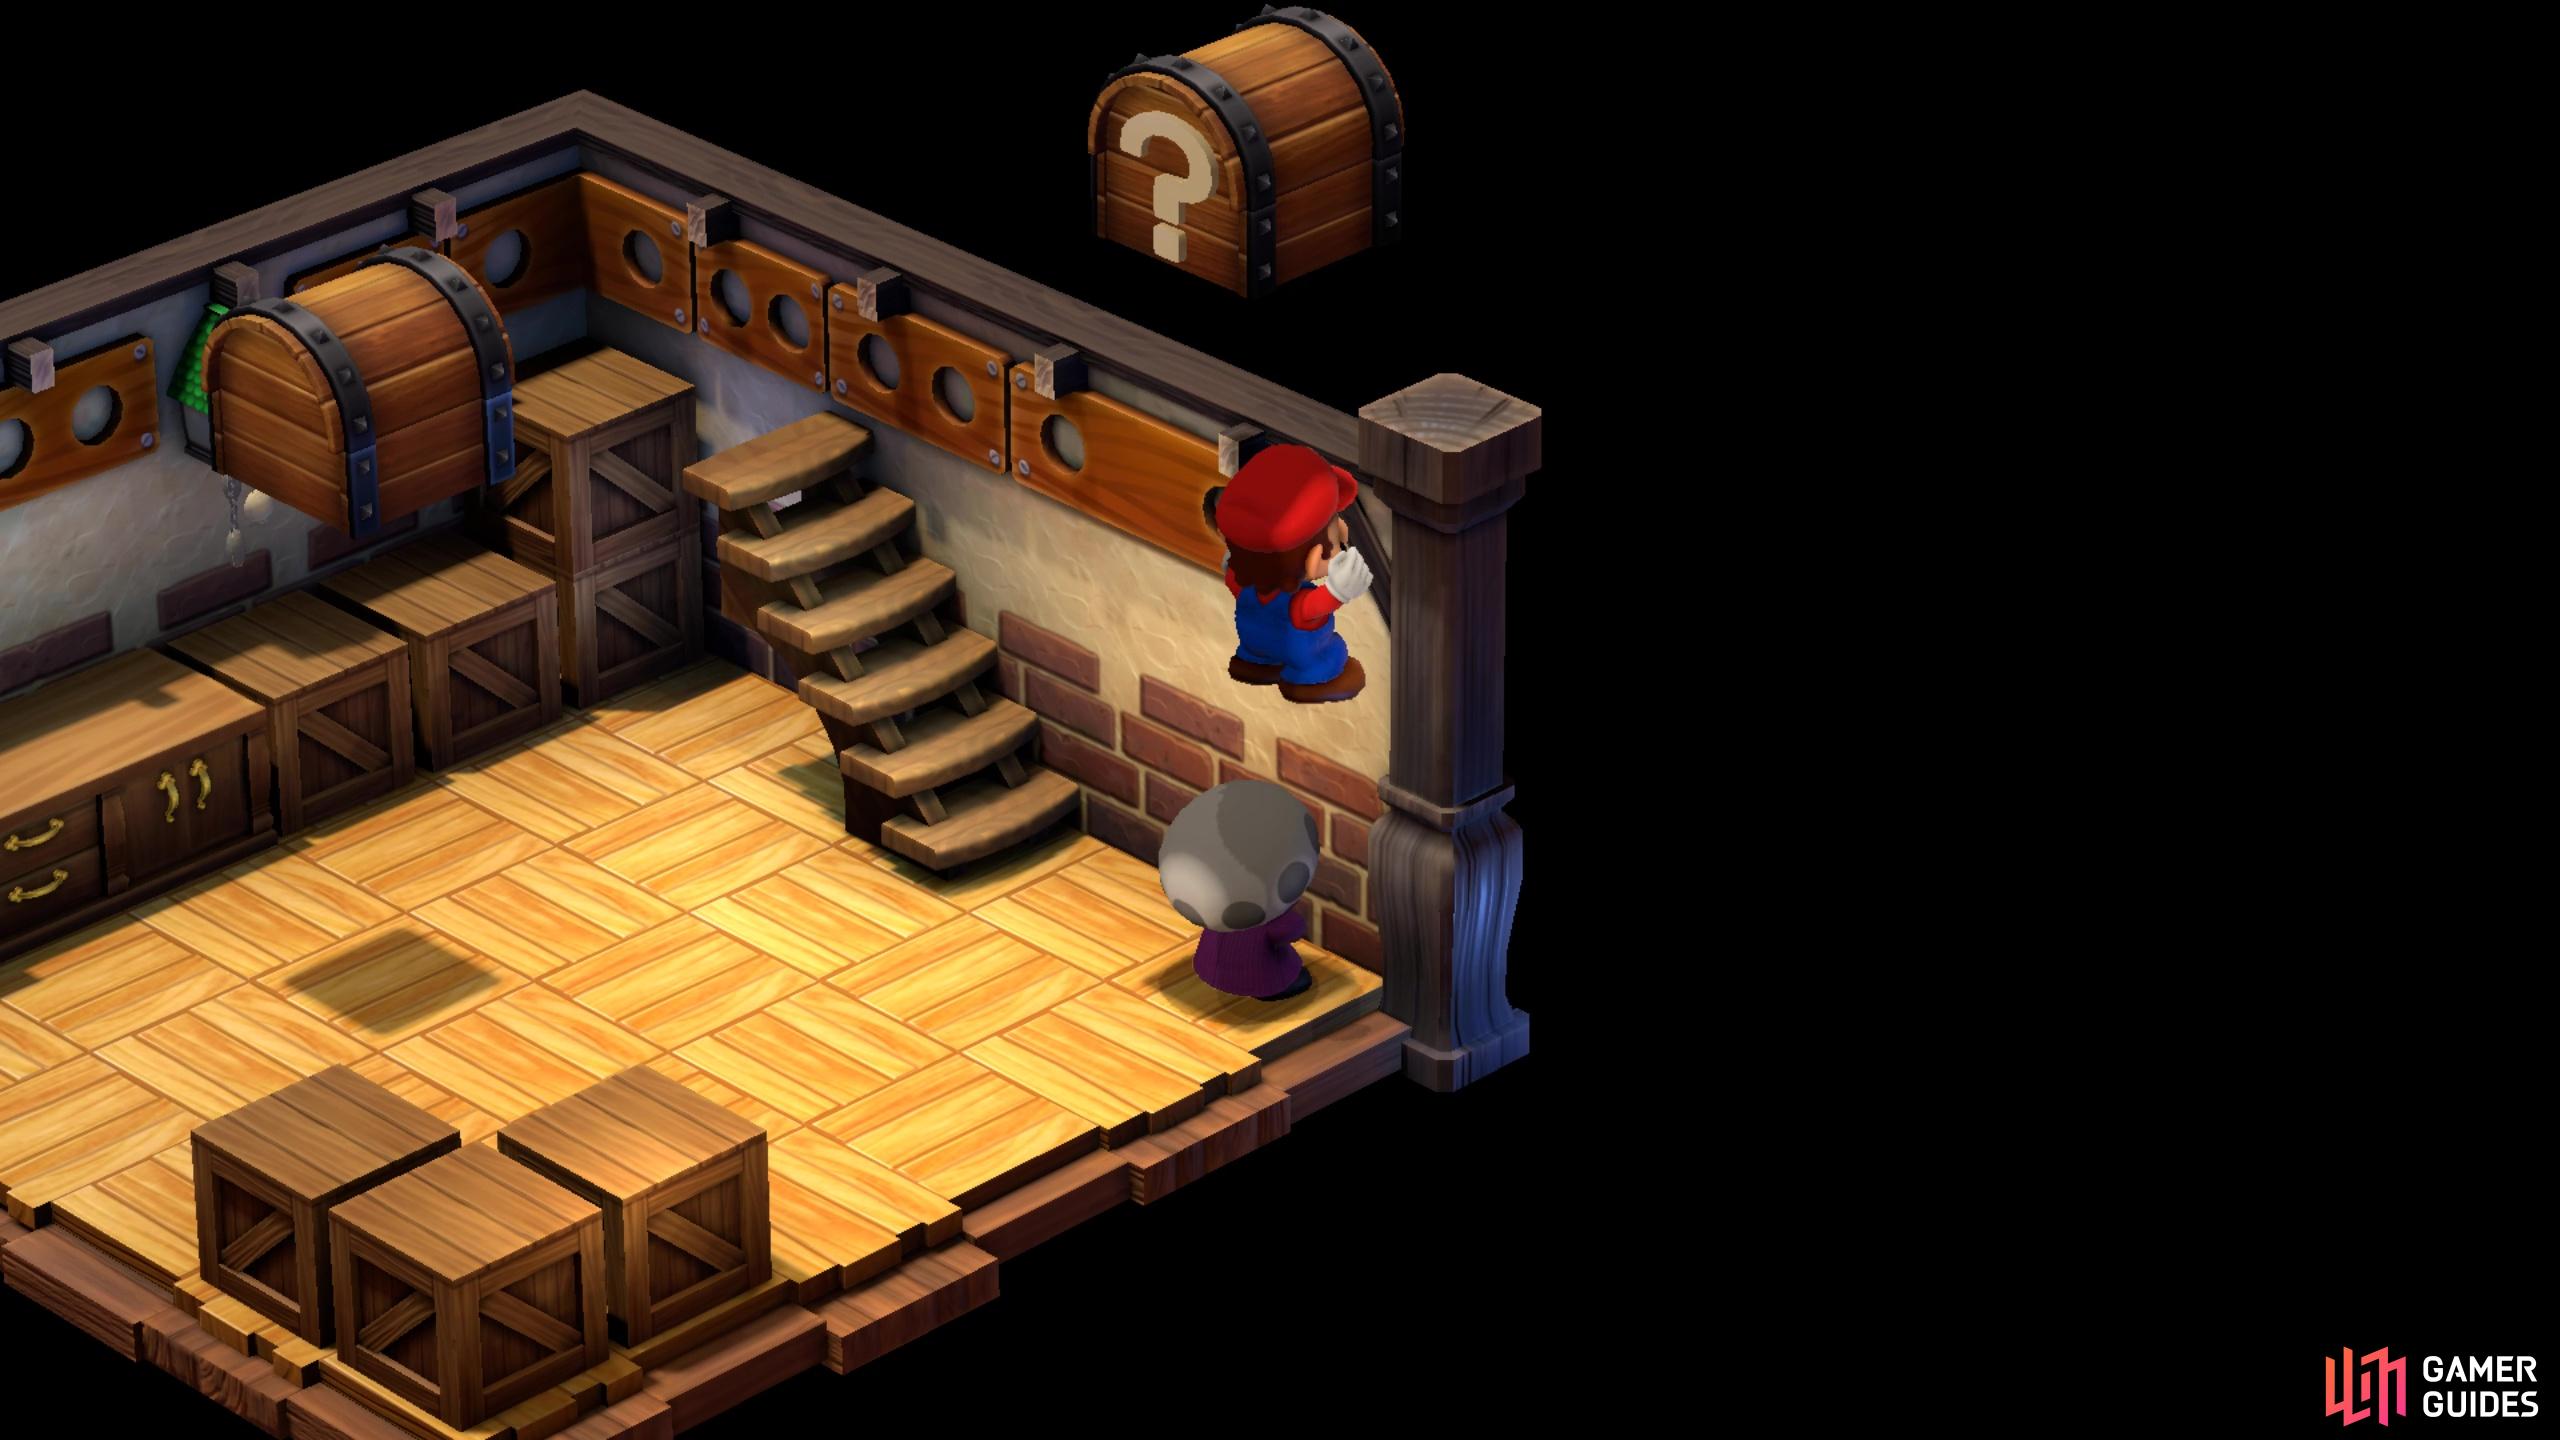 then equip the Signal Ring he gives you and find the hidden chest near the stairs.